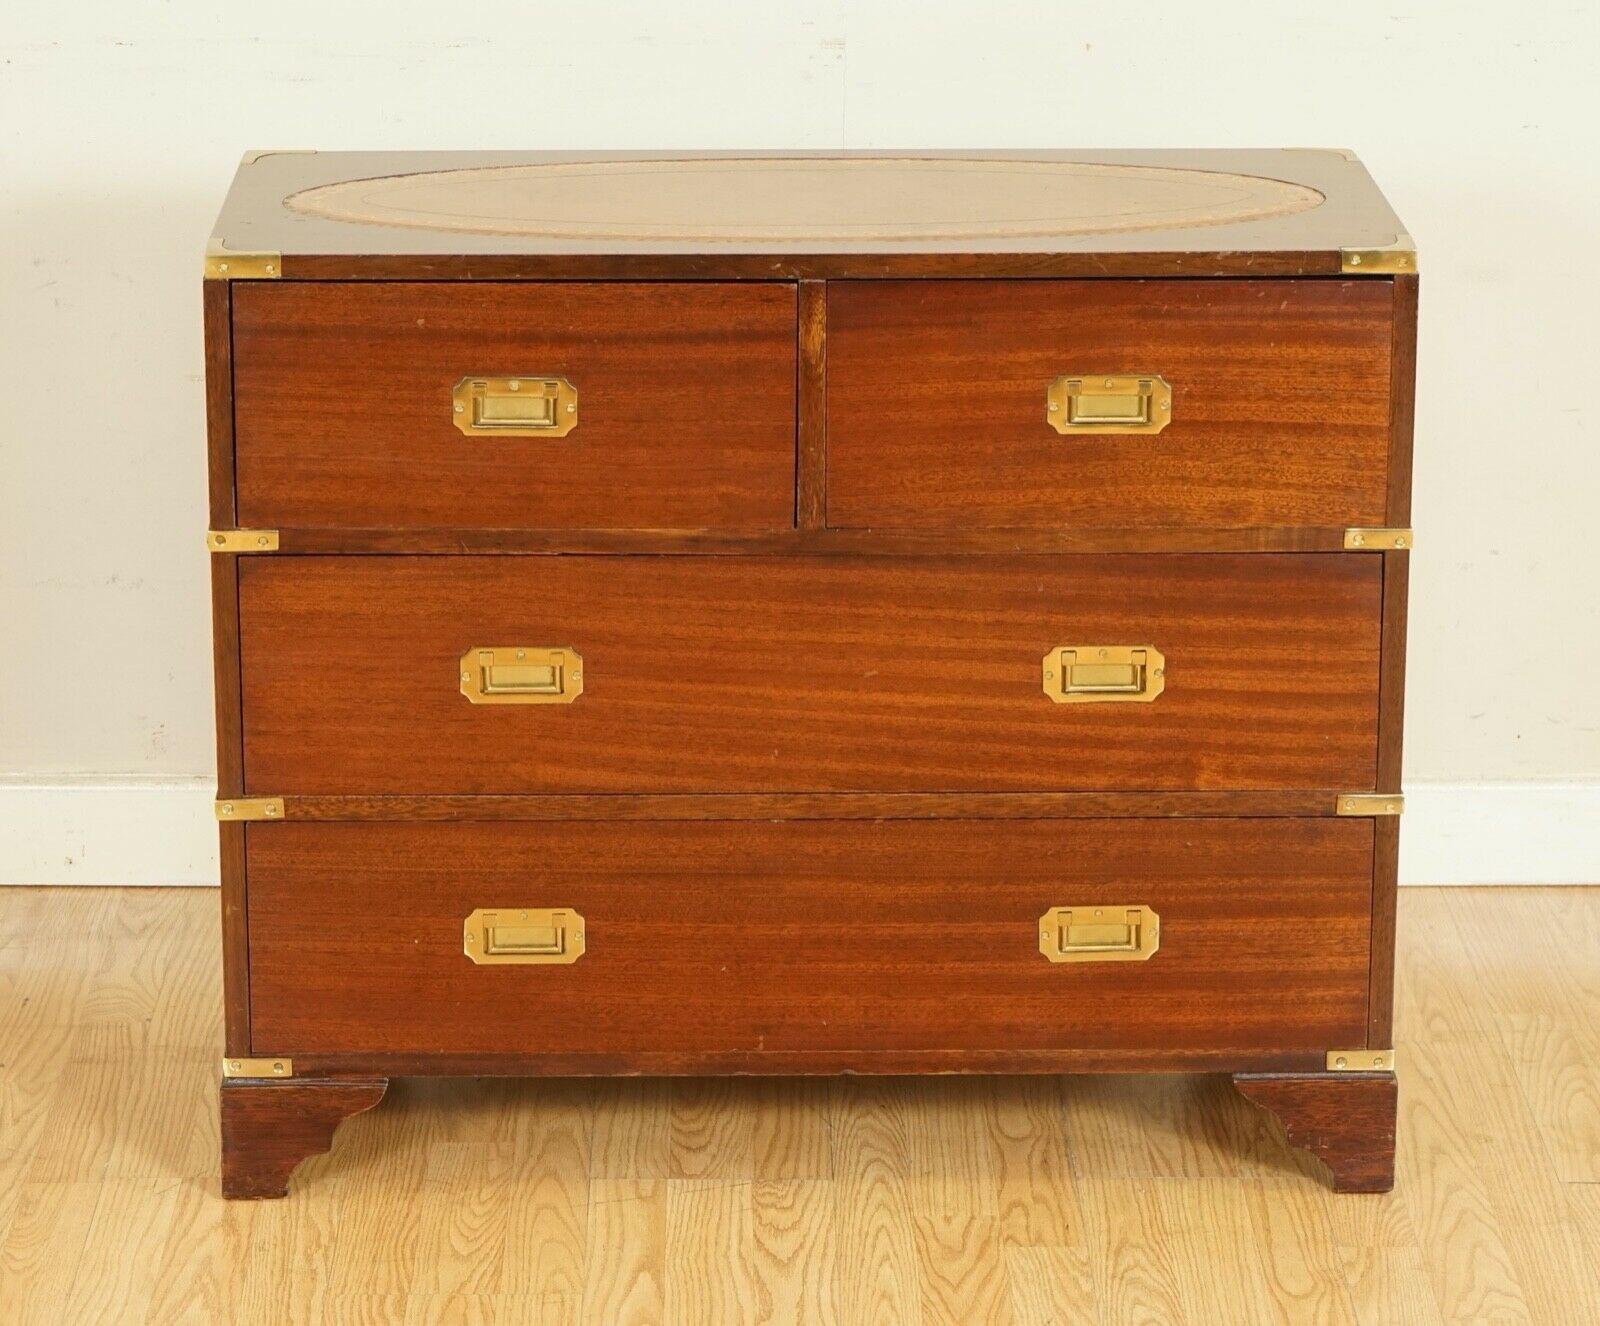 Hand-Crafted Bevan Funnell Military Campaign Chest of Drawers with Brown Leather Inset Top